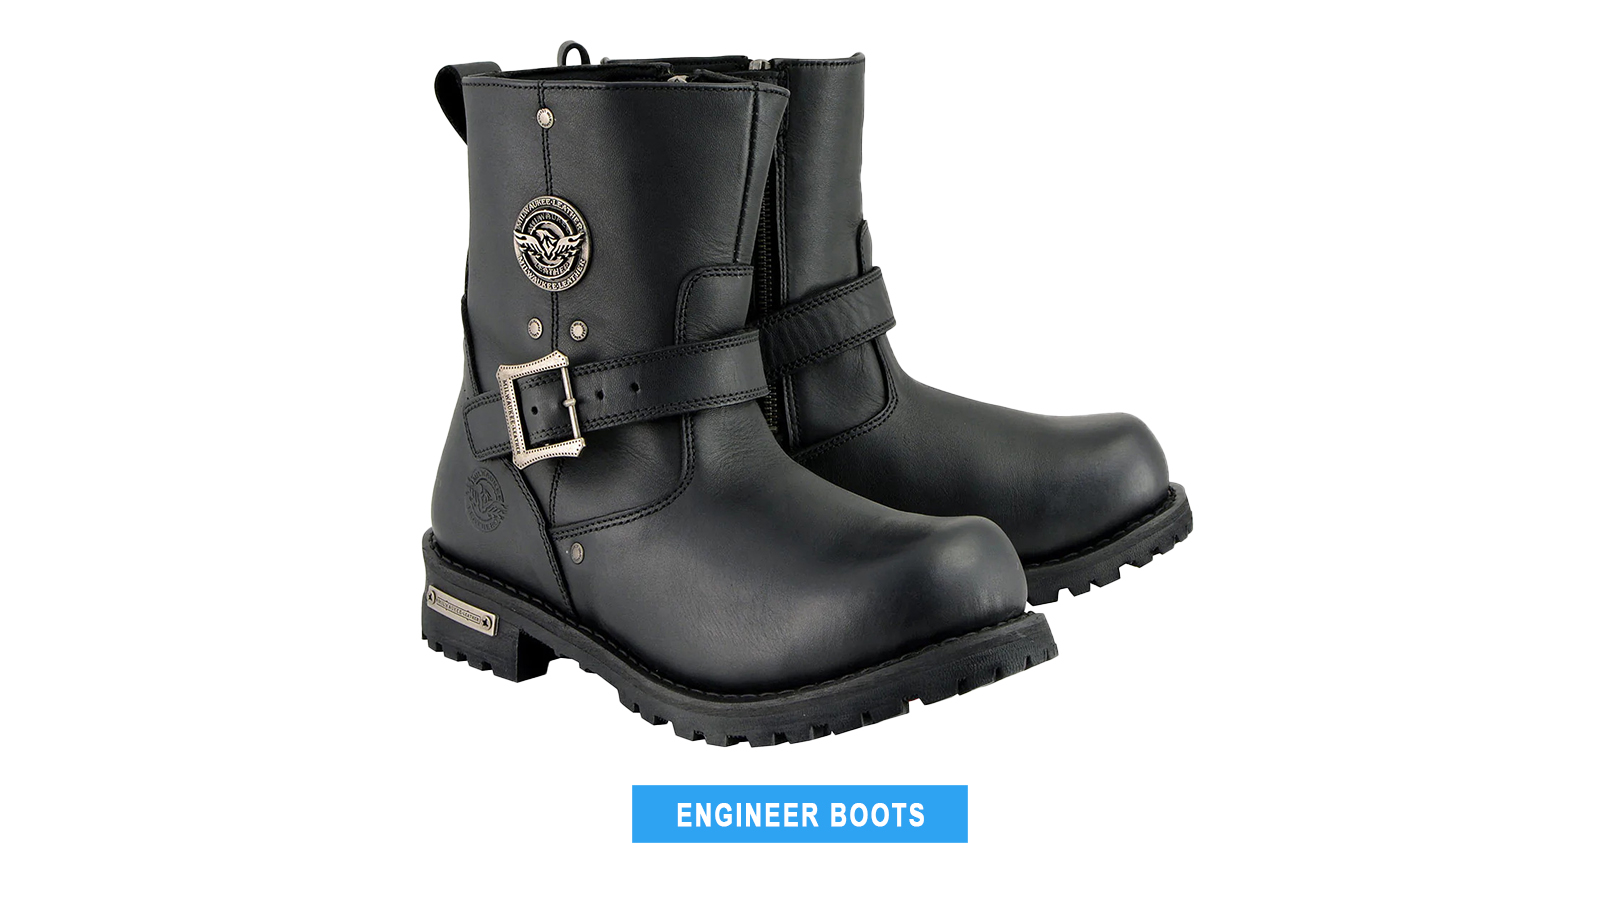 Engineer's boots style